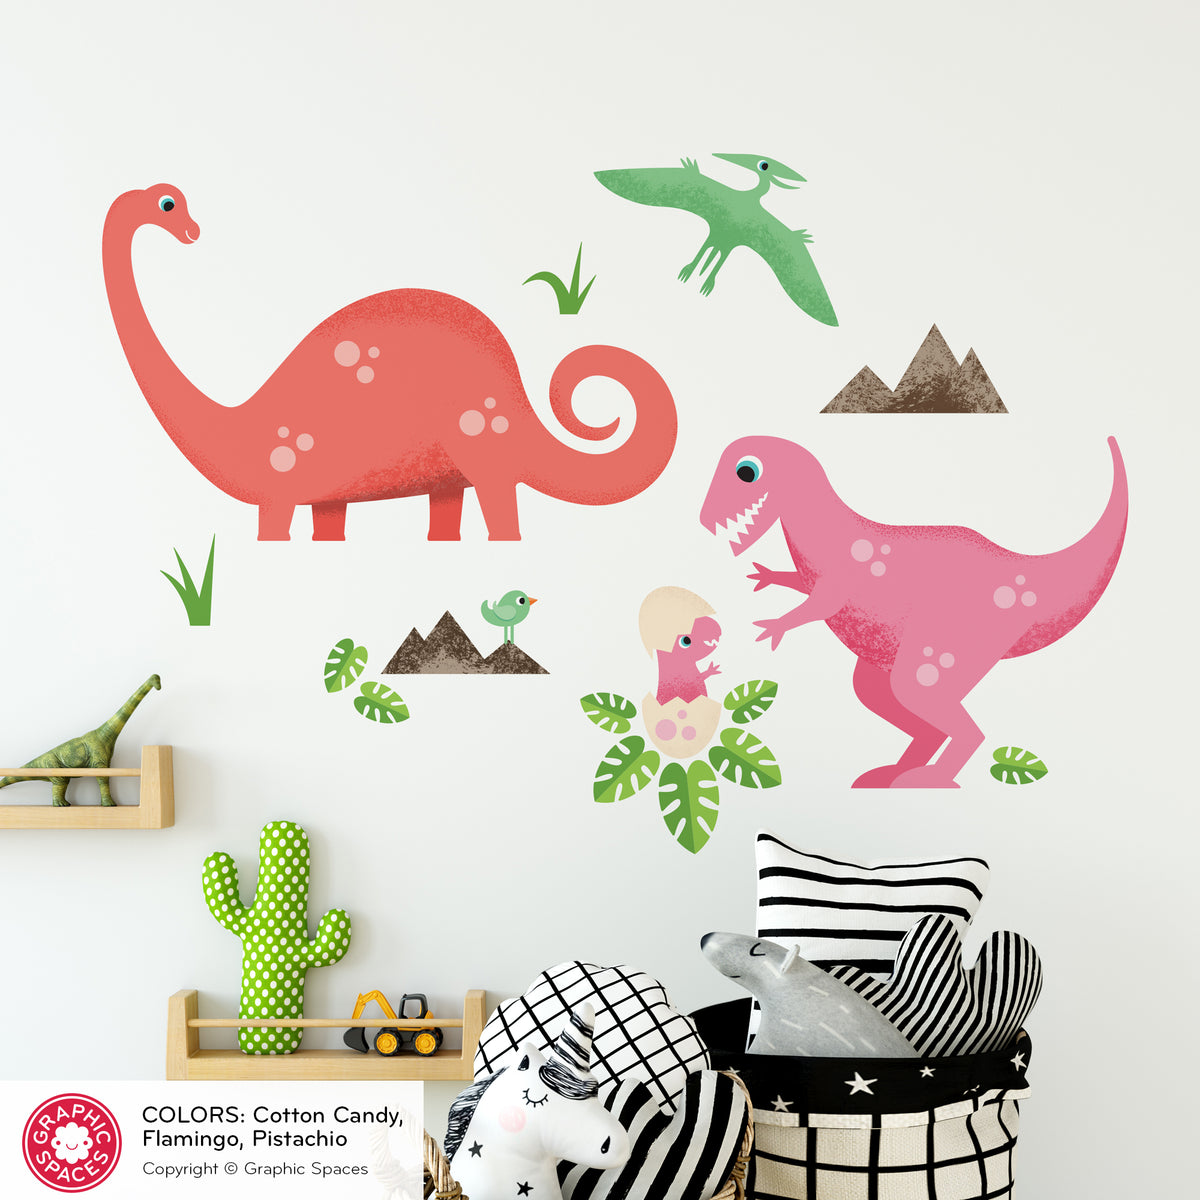 Dinosaur Fabric Wall Decal, Pack of 4